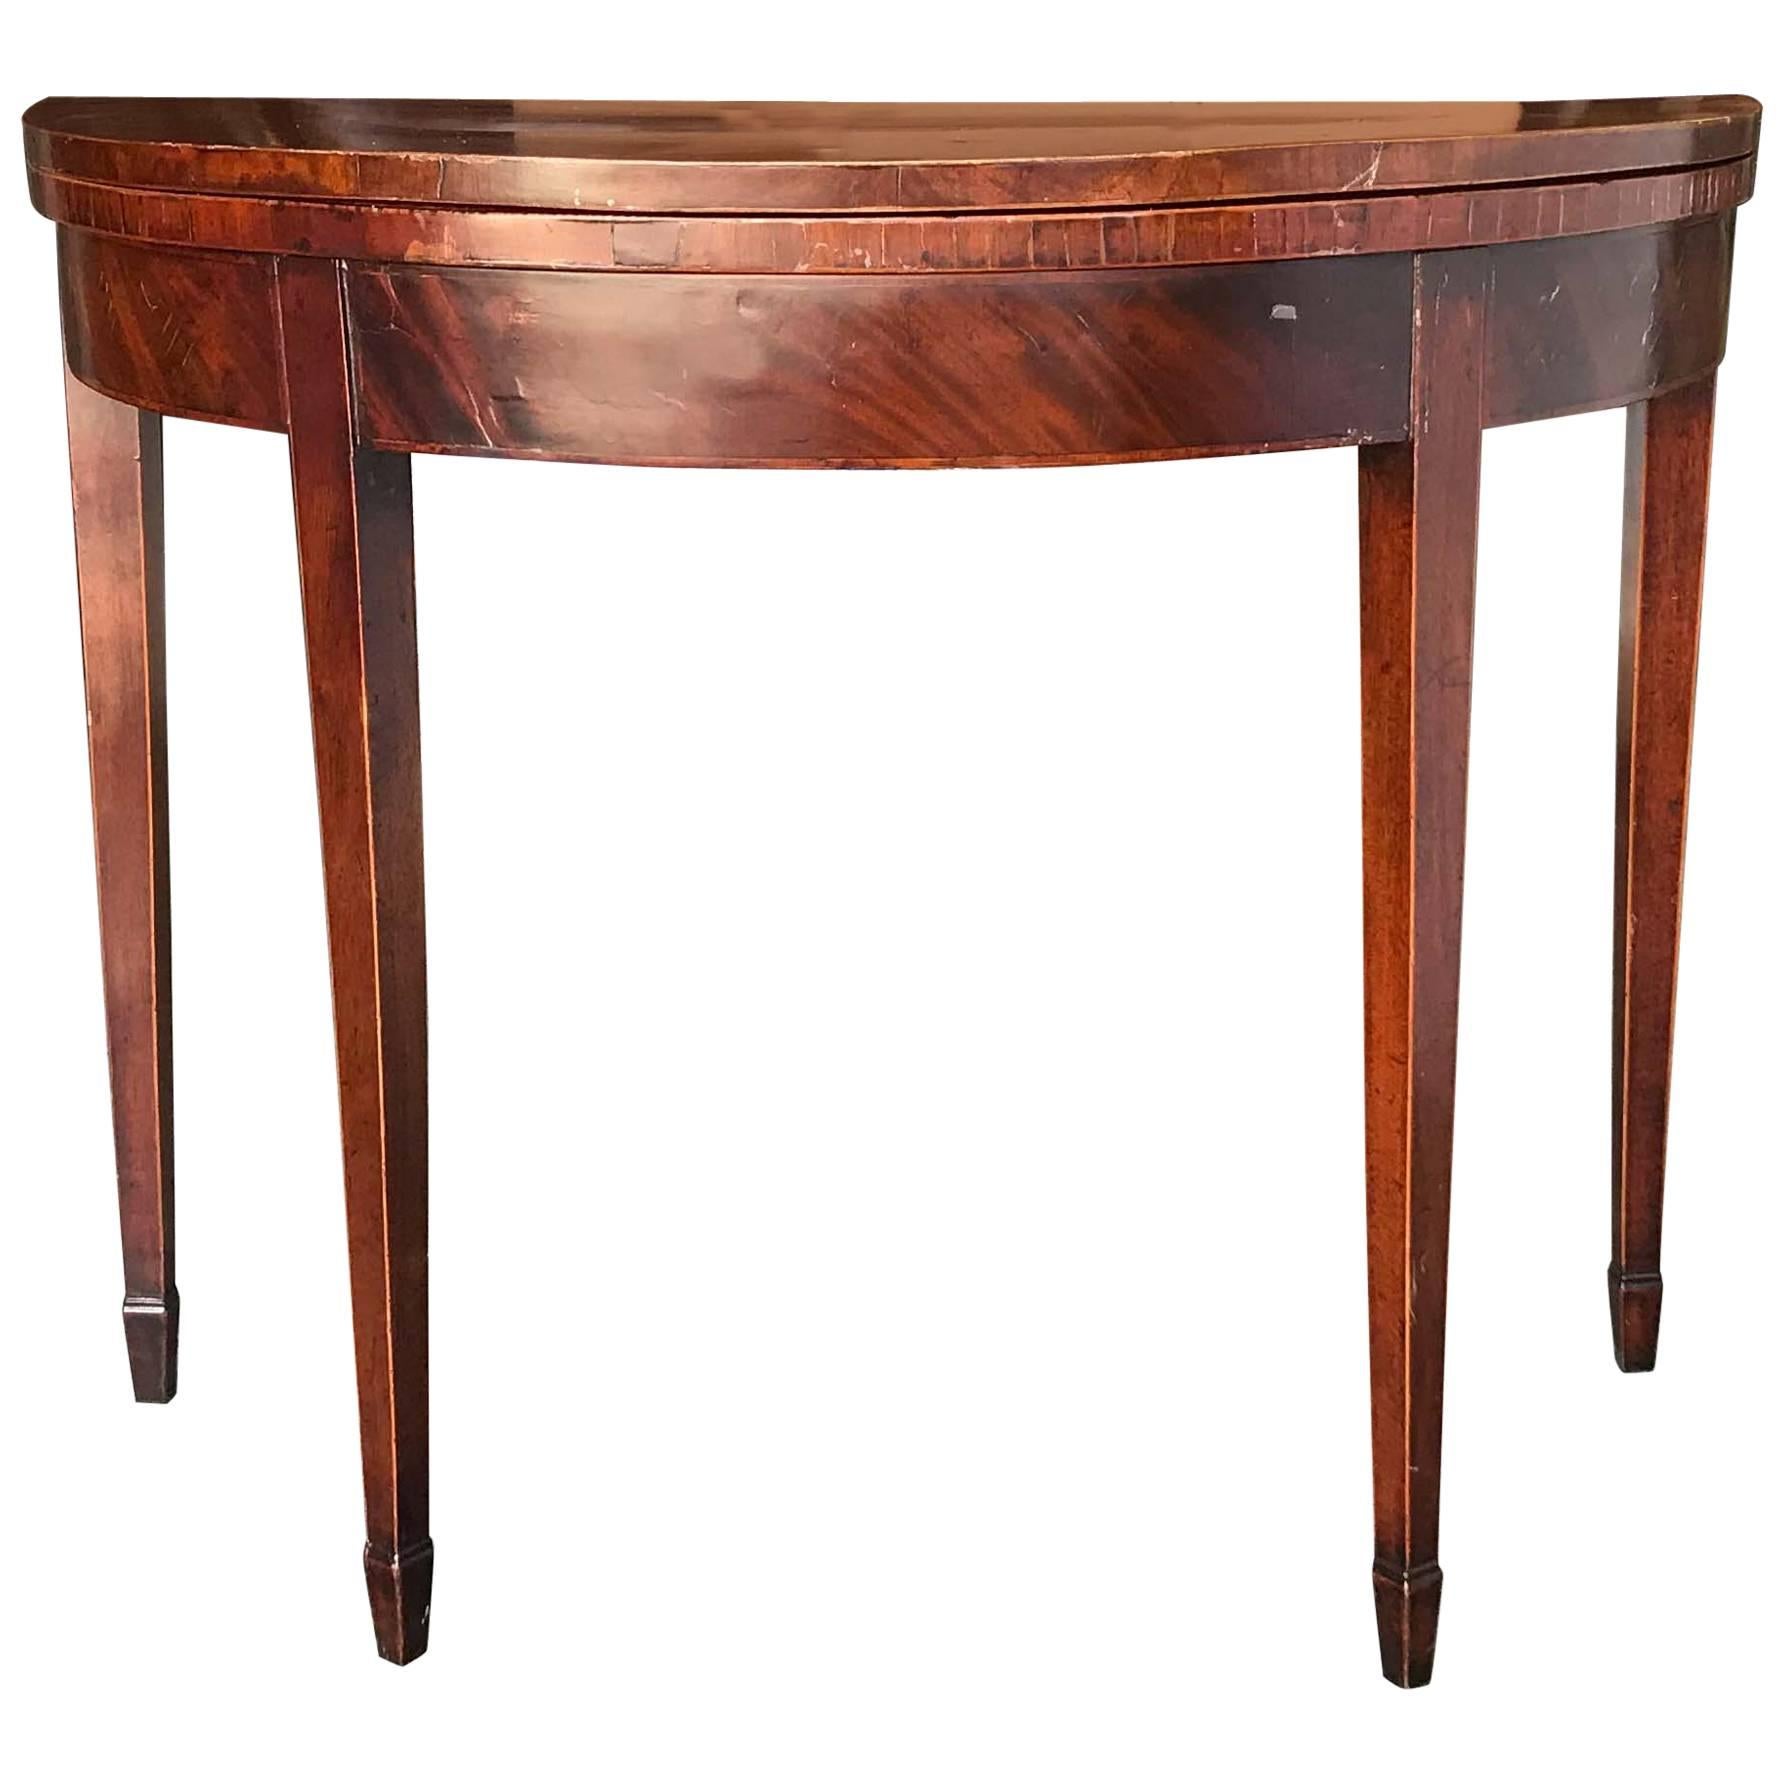 English Inlaid Flip-Top Demilune Card Table For Sale